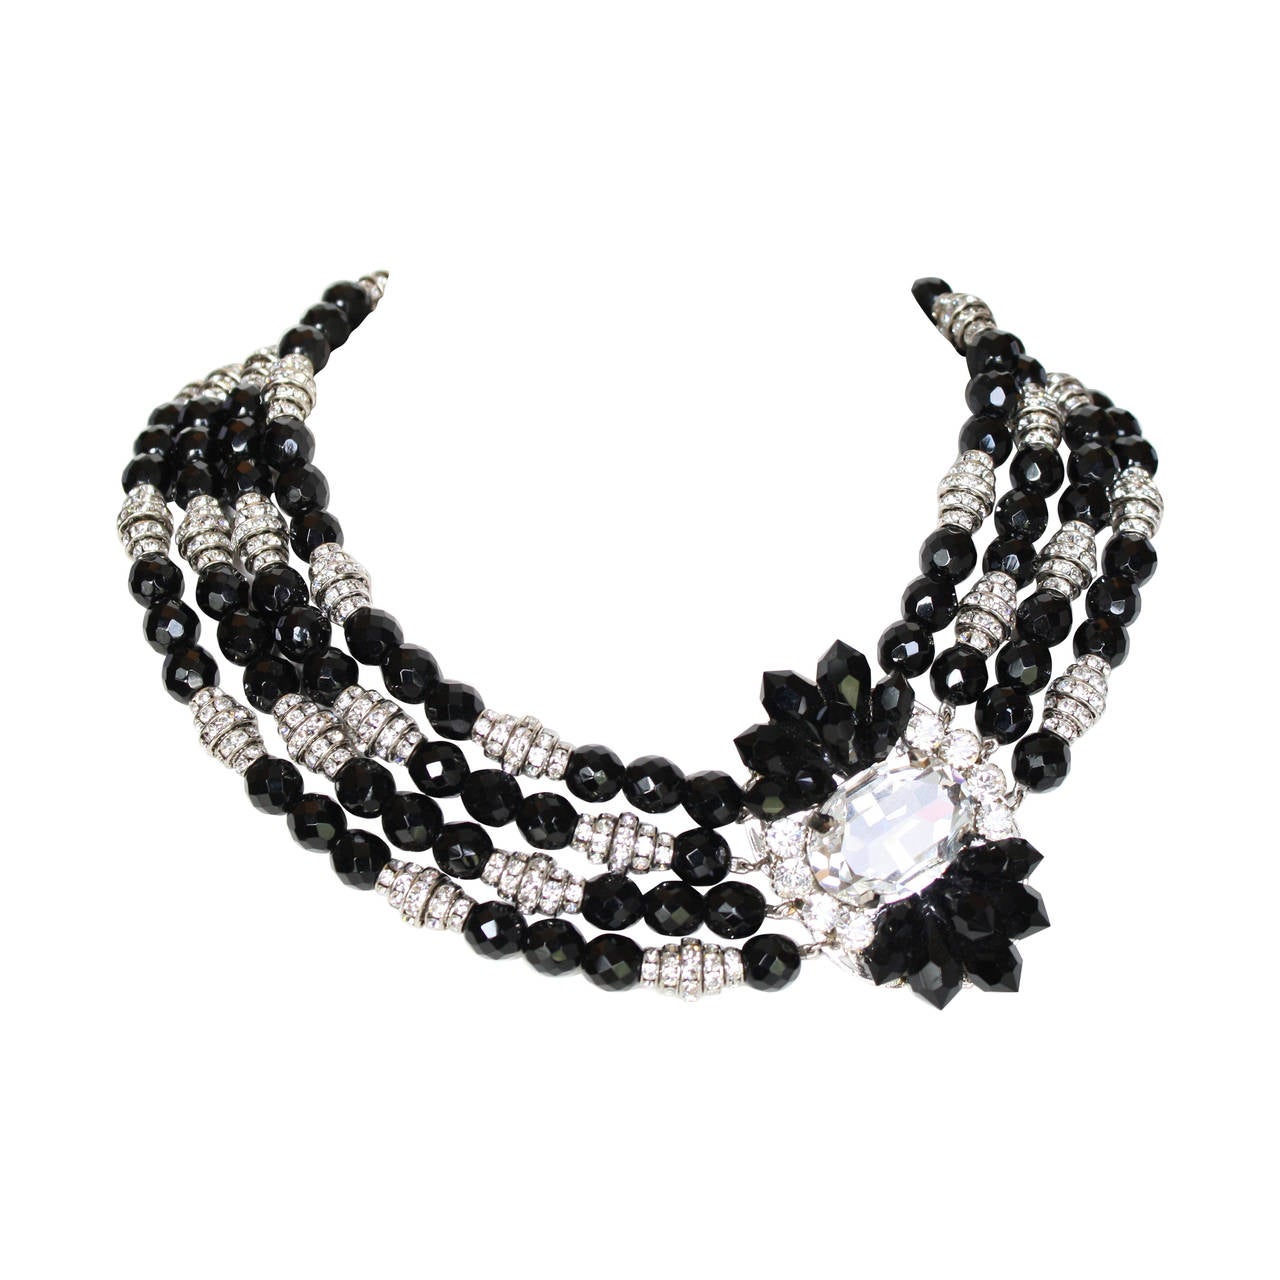 Francoise Montague Swarovski Crystal and Glass Bead Statement Necklace